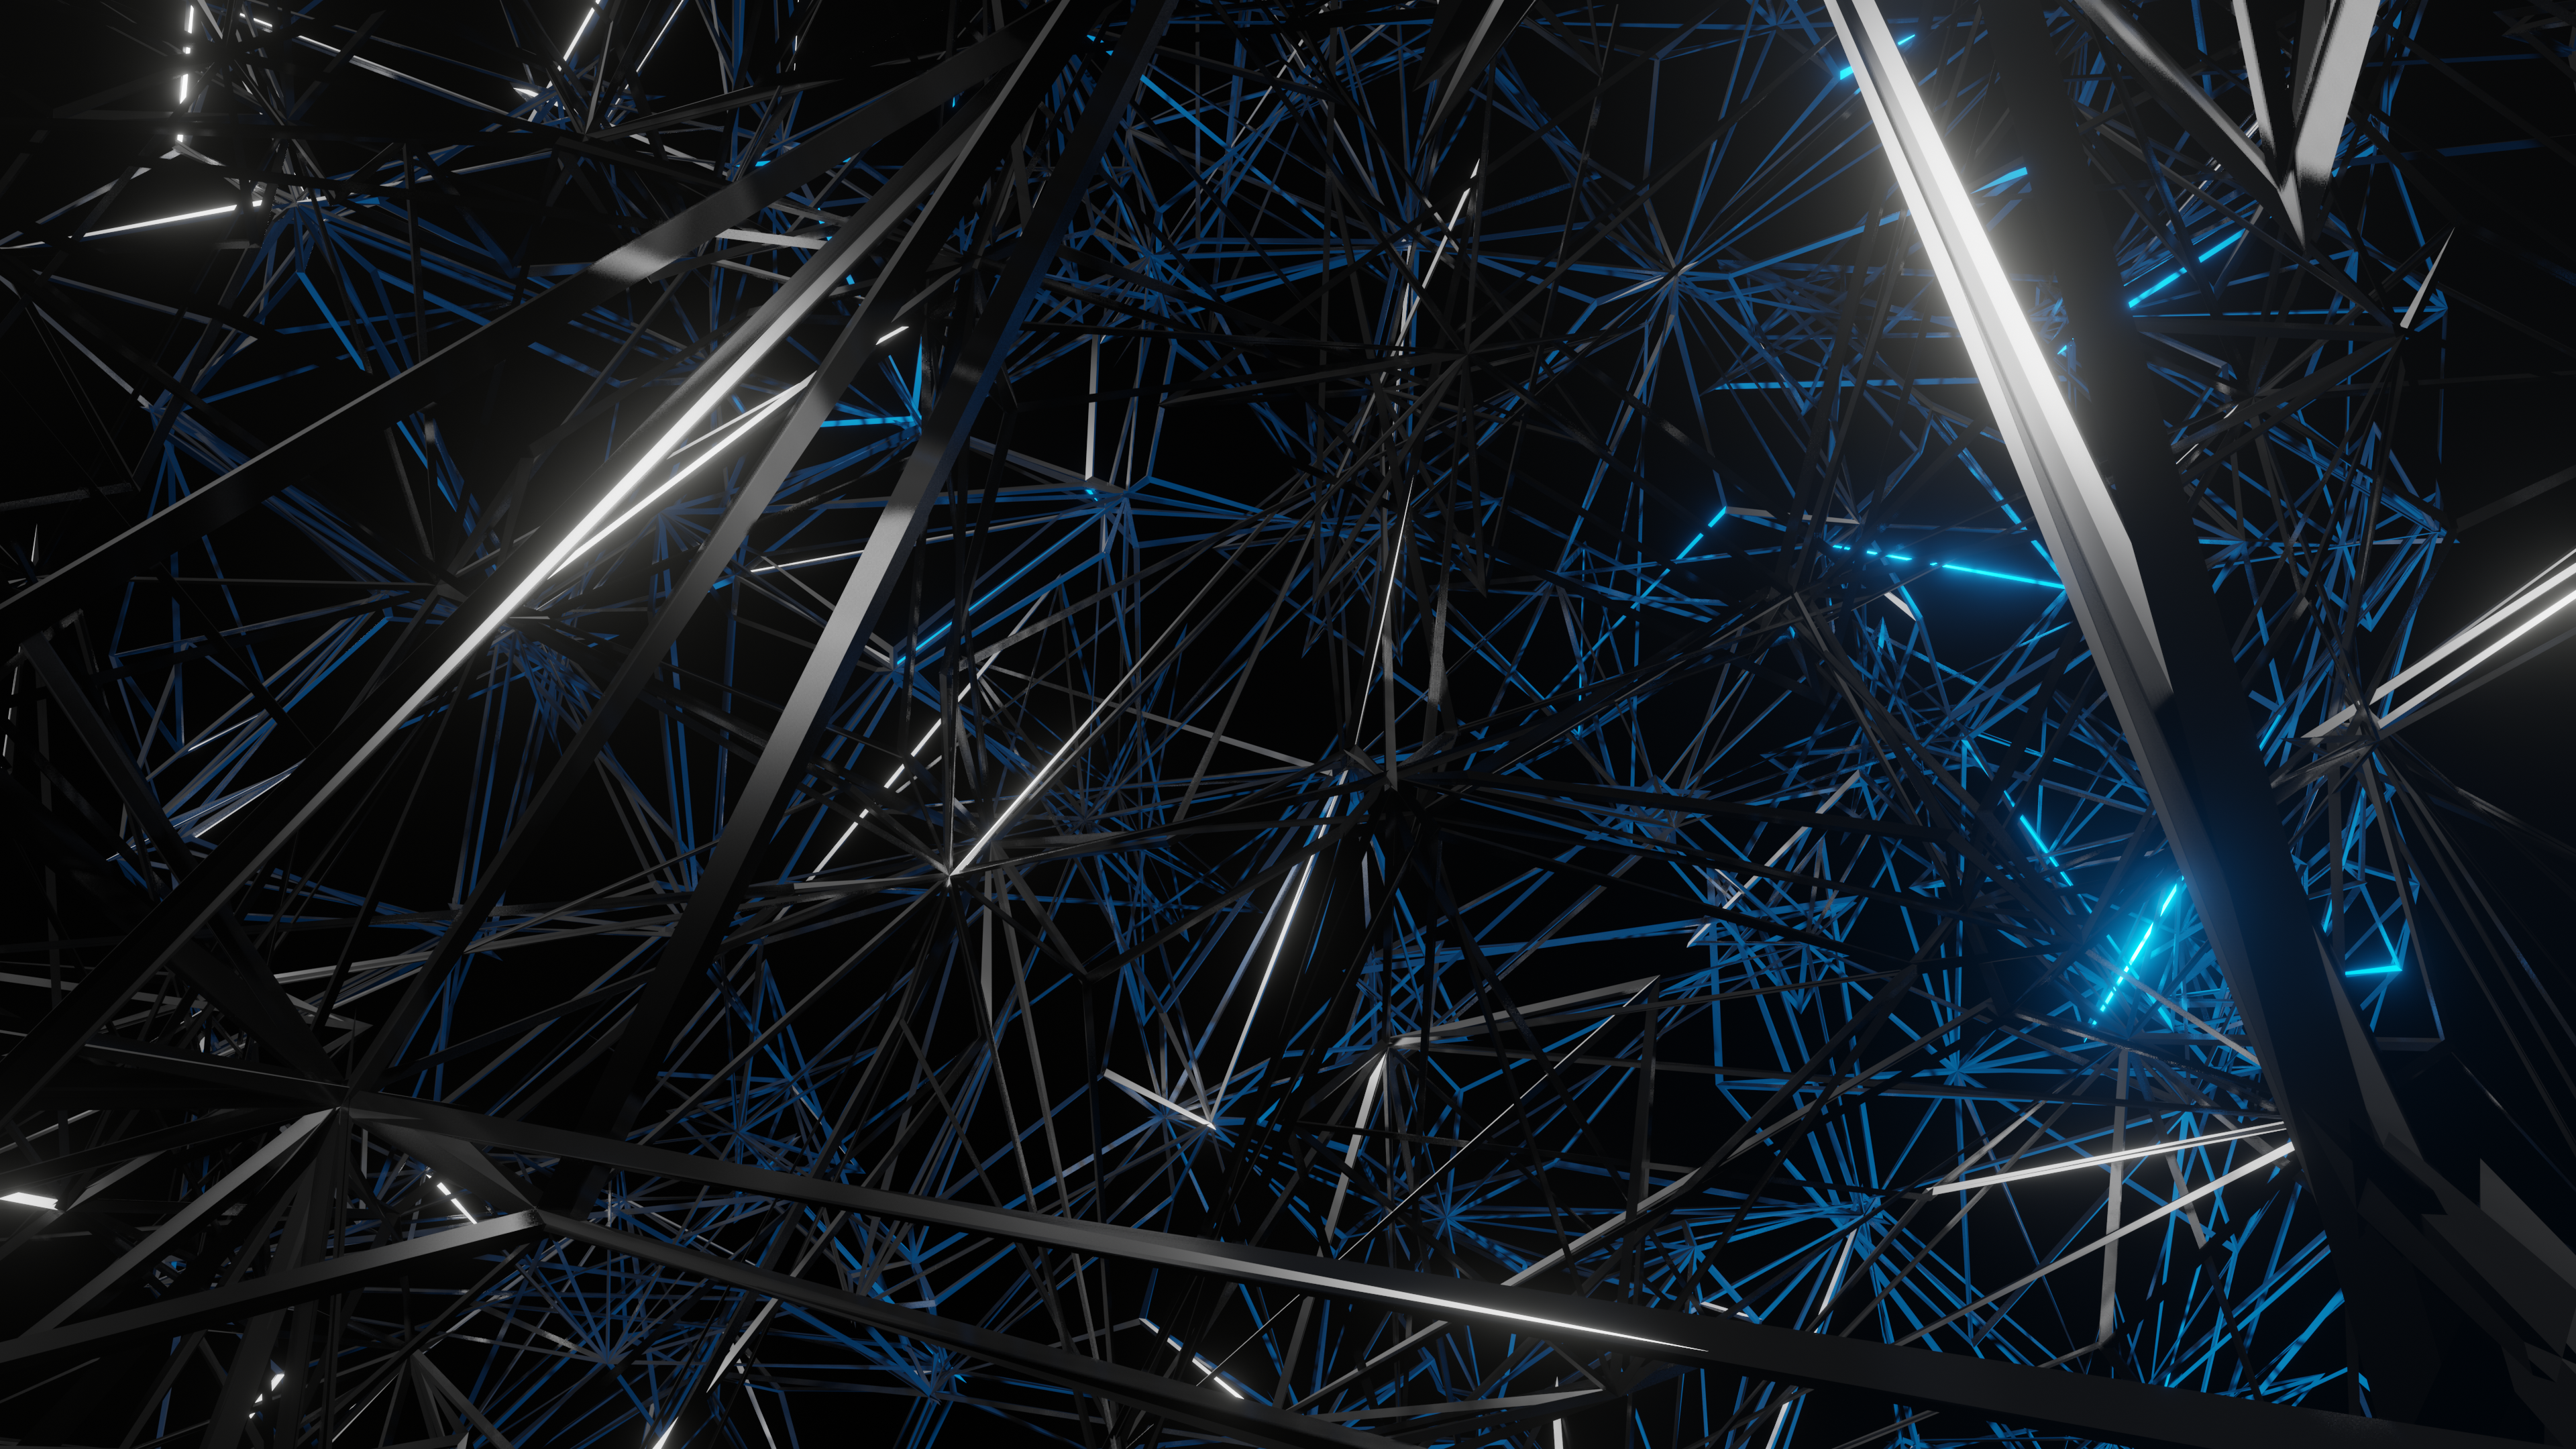 Abstract 3D 3840x2160